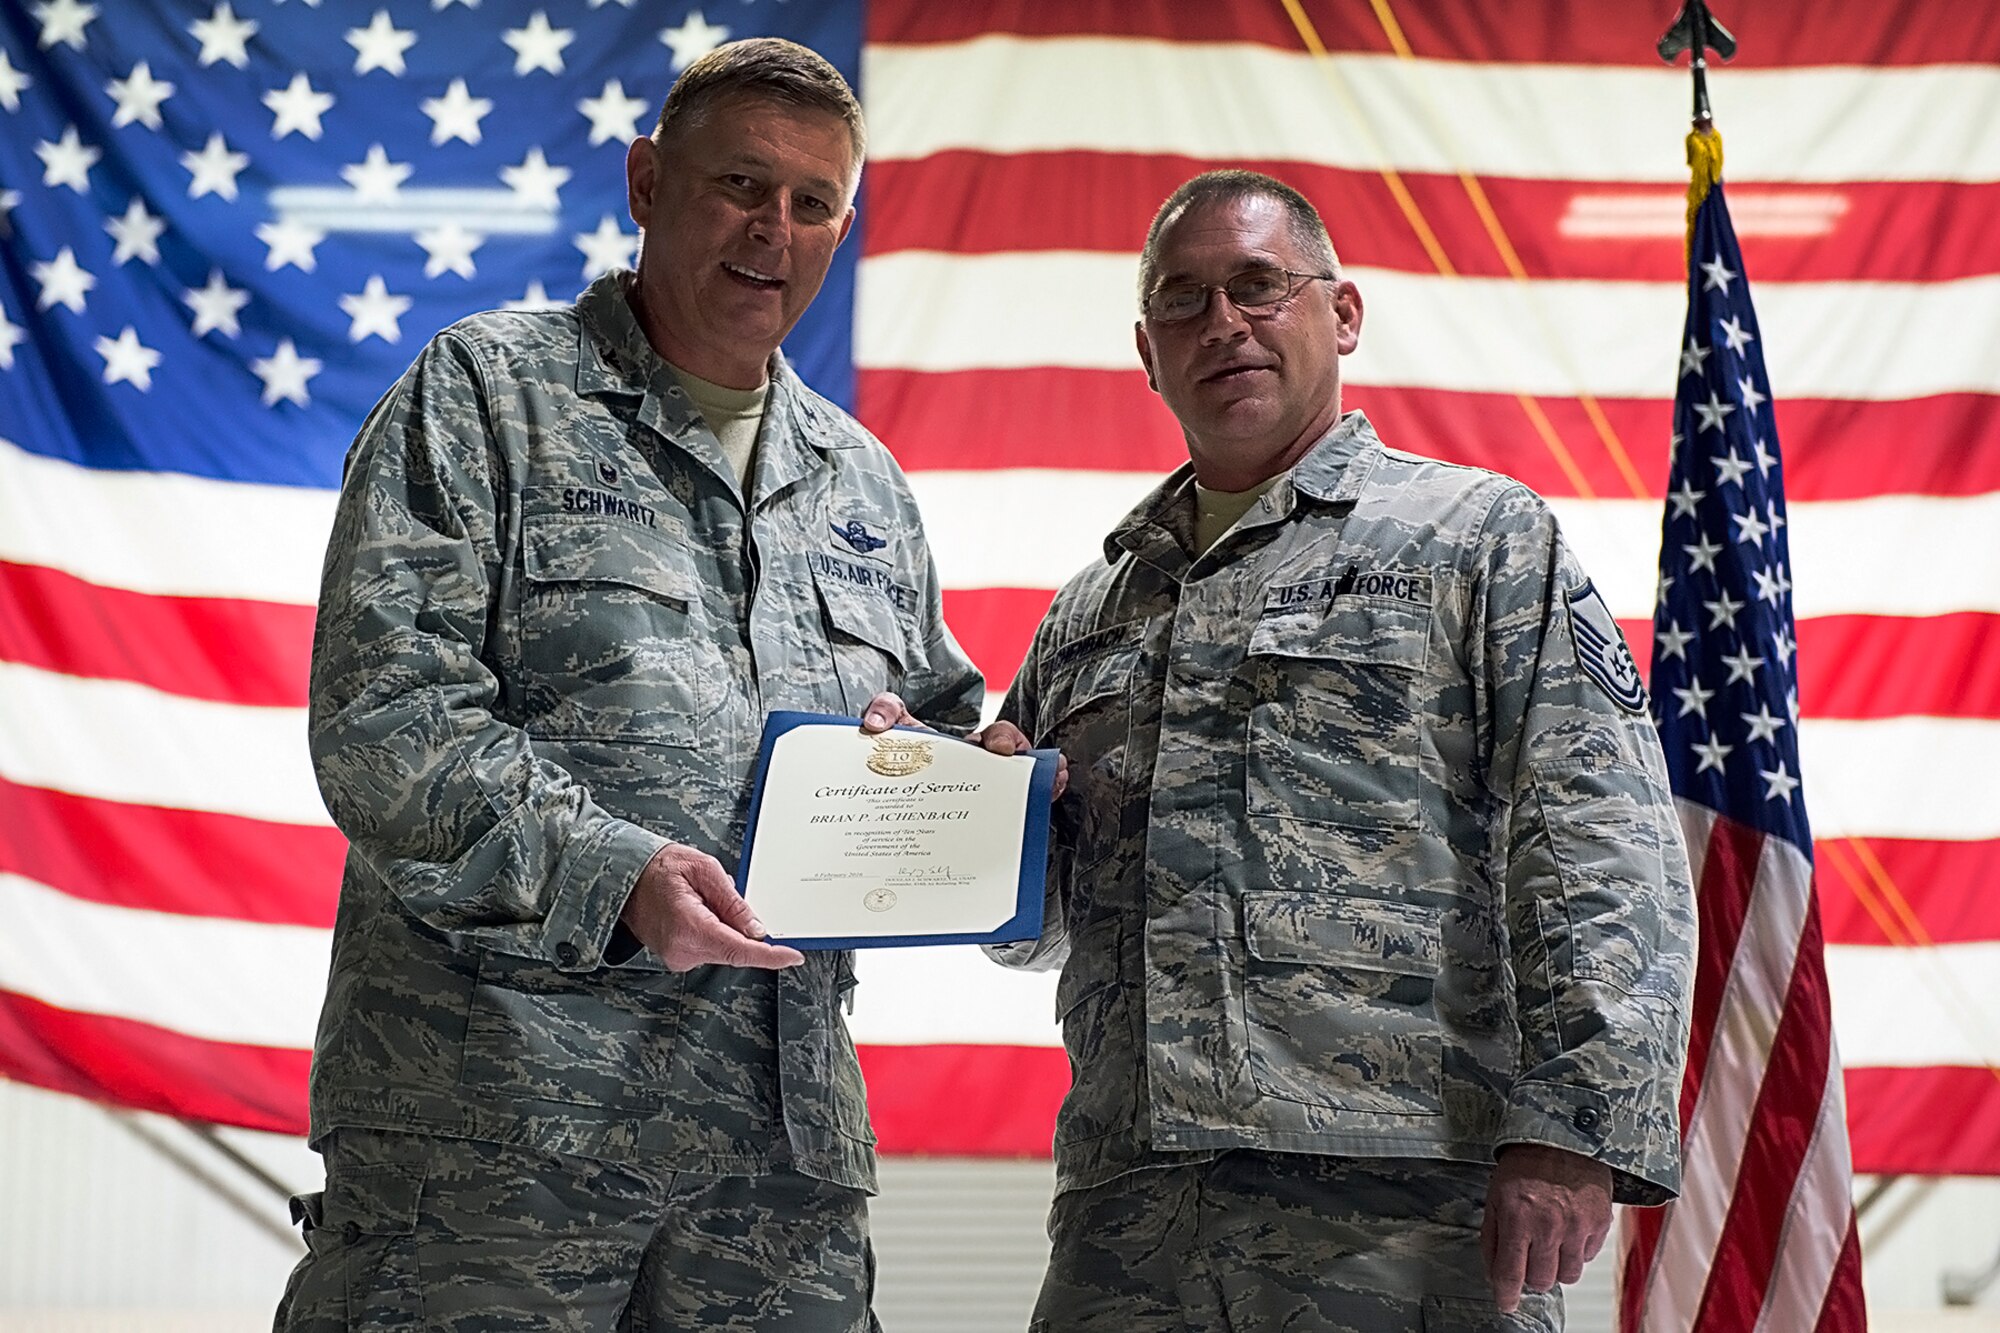 Master Sgt. Brian Achenback, A KC-135R Stratotanker crew chief with the 434th Maintenance Squadron, right, receives a certificate for 30 years of federal service March 9, 2016 at Grissom Air Reserve Base, Ind. Achenback and other civilians were recognized during a wing commander’s call. (U.S. Air Force photo/Douglas Hays)